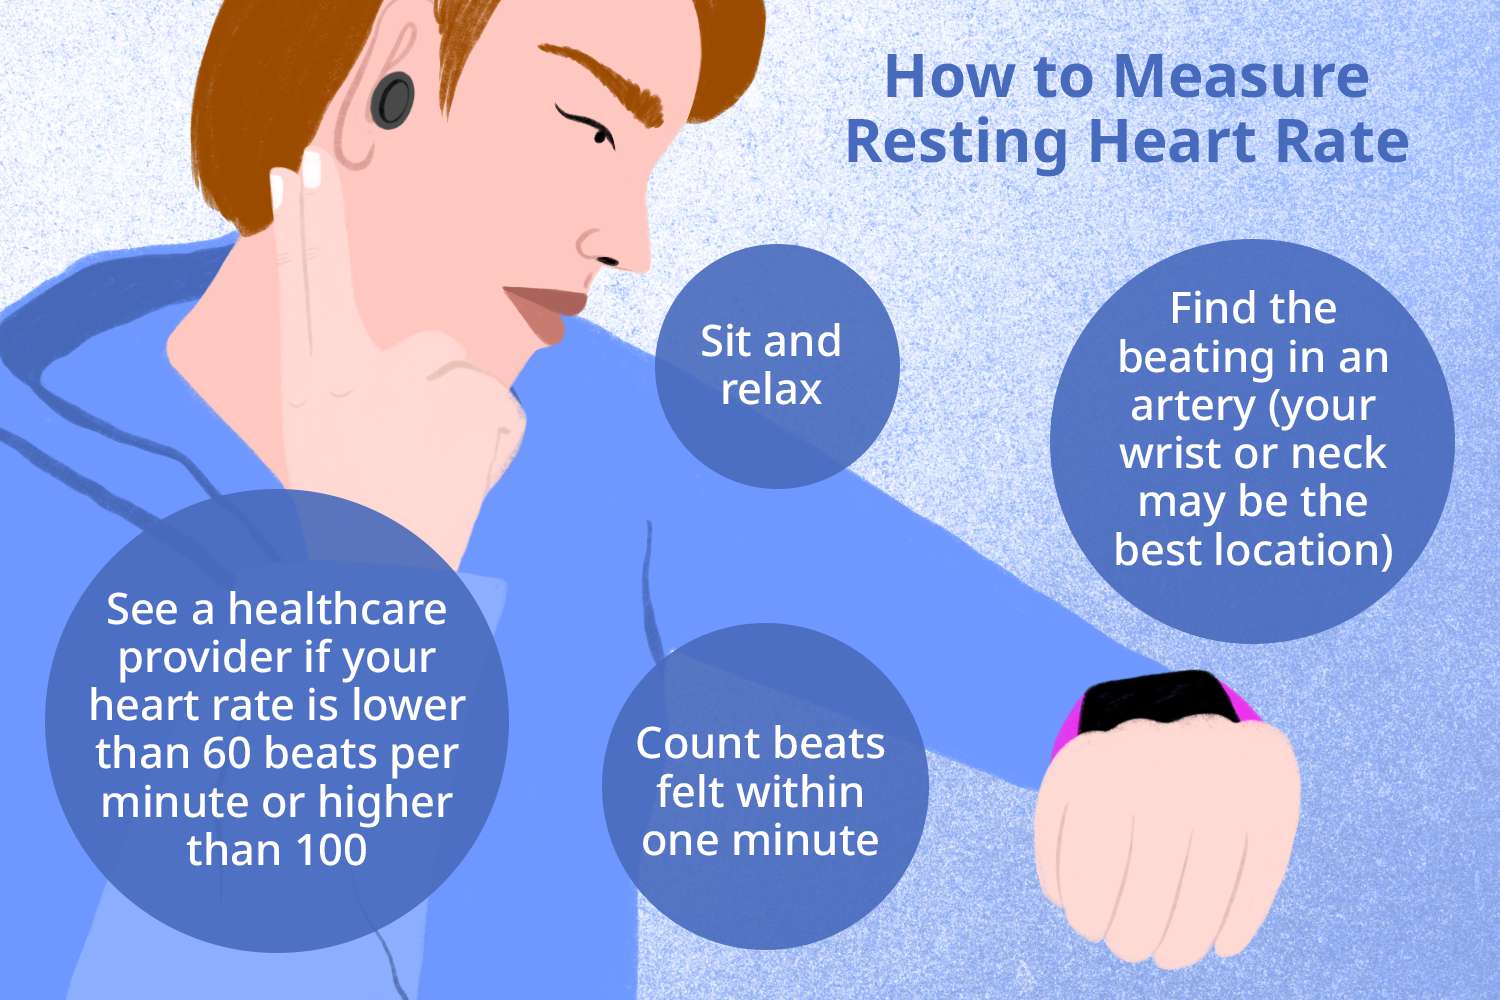 When is the Best Time to Measure Resting Heart Rate?